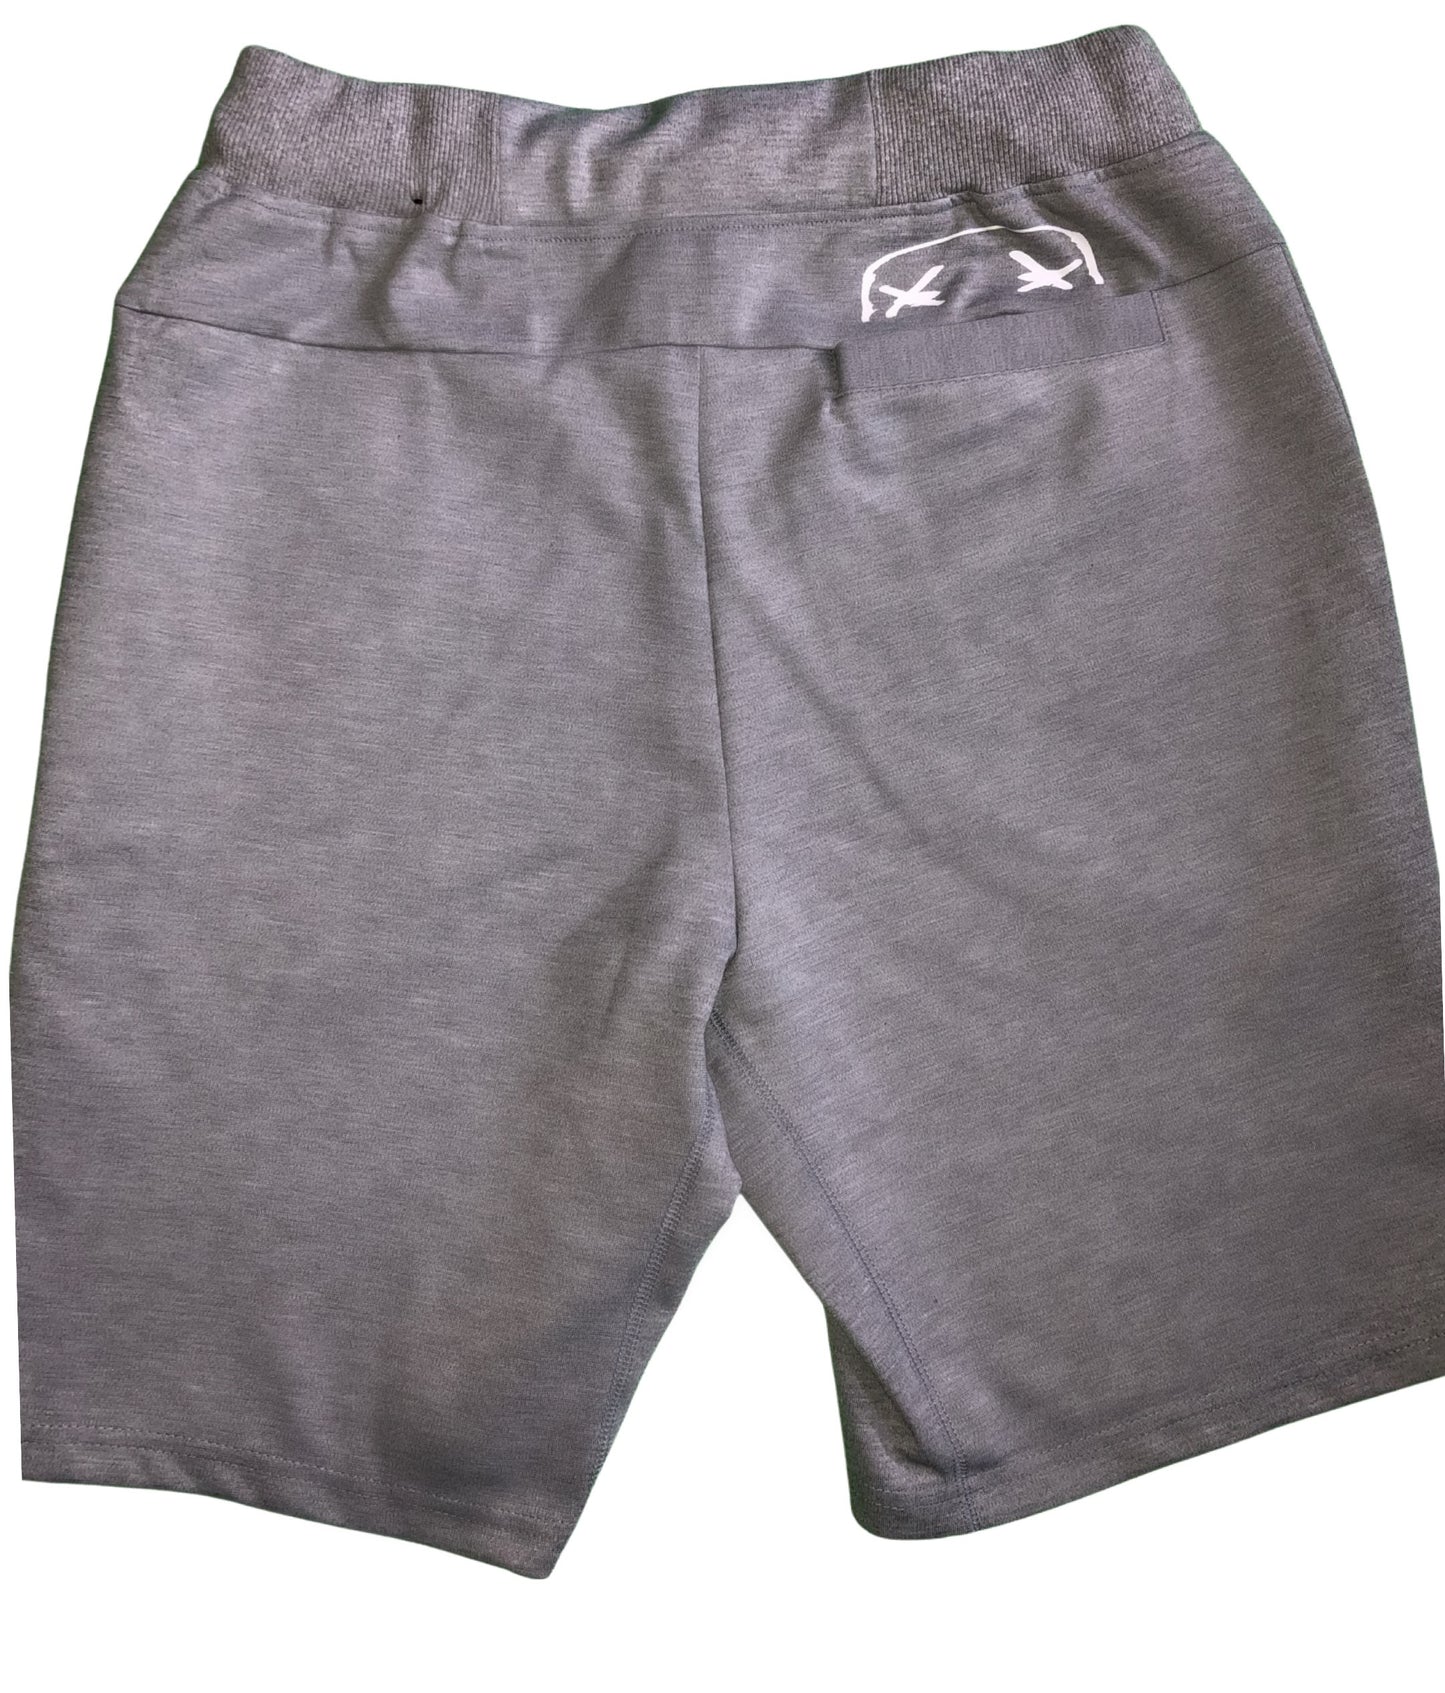 Grey “WHAT THE” Tech Shorts